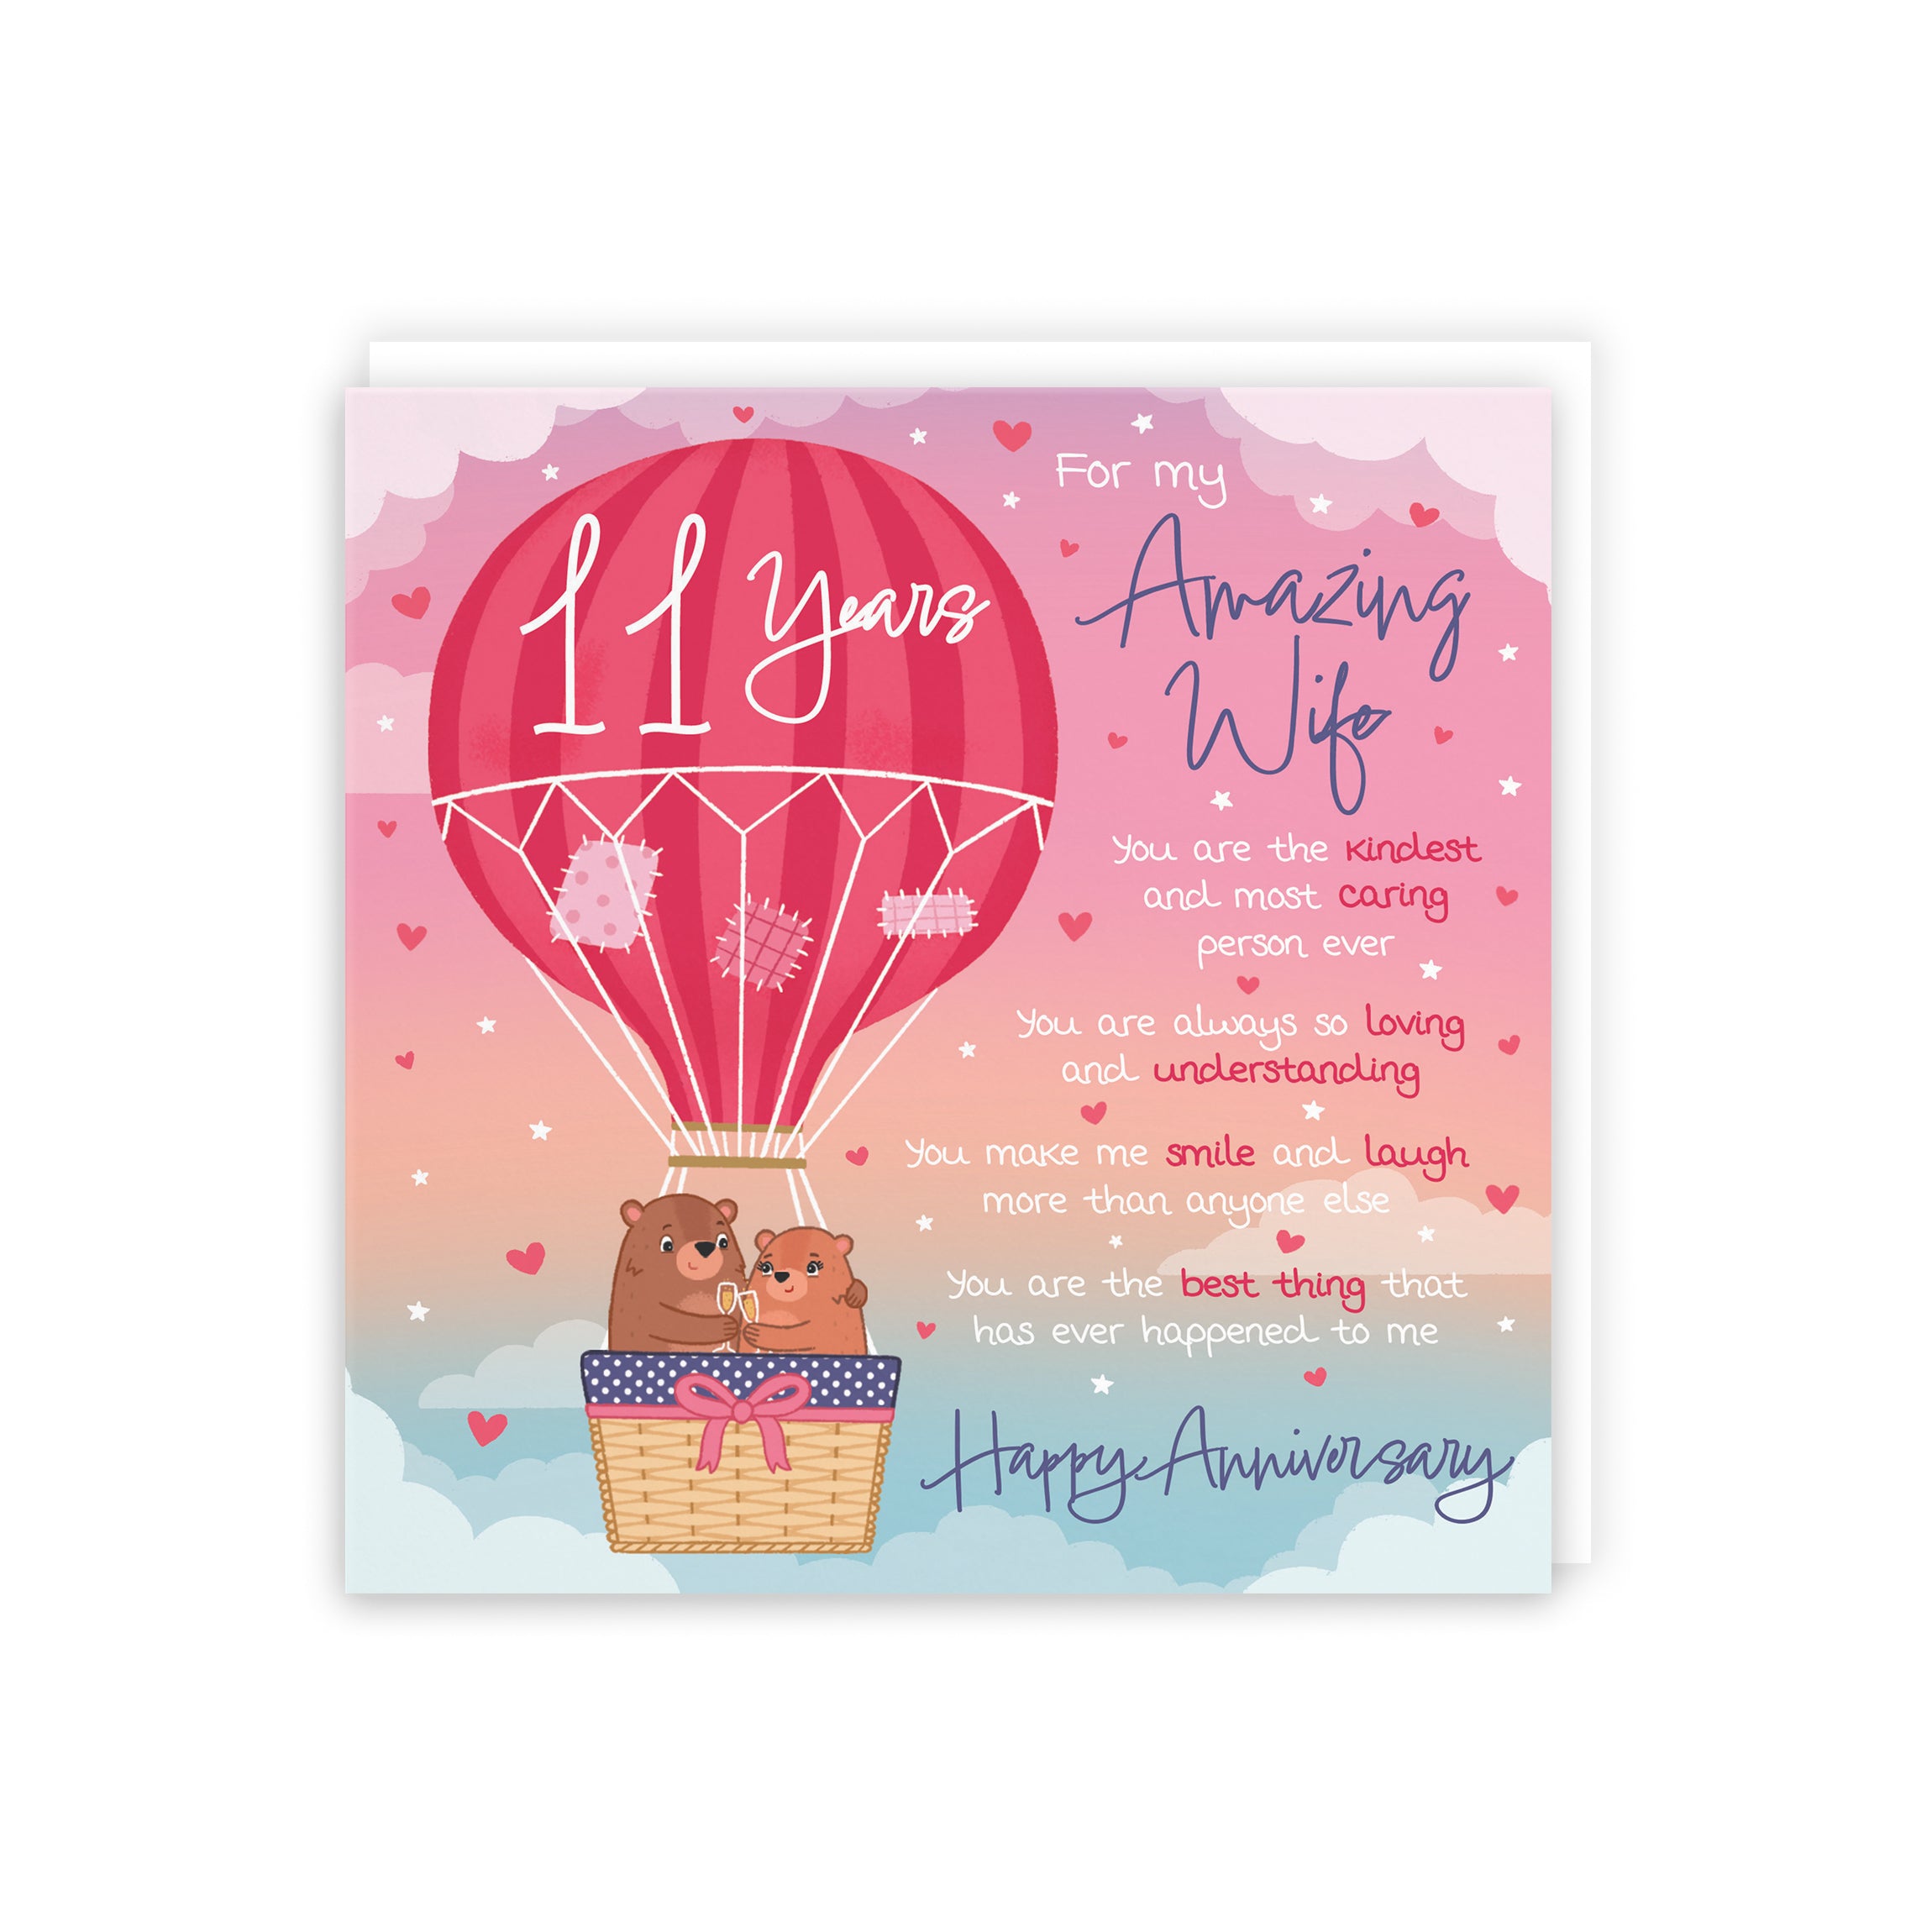 Wife 11th Anniversary Poem Card Love Is In The Air Cute Bears